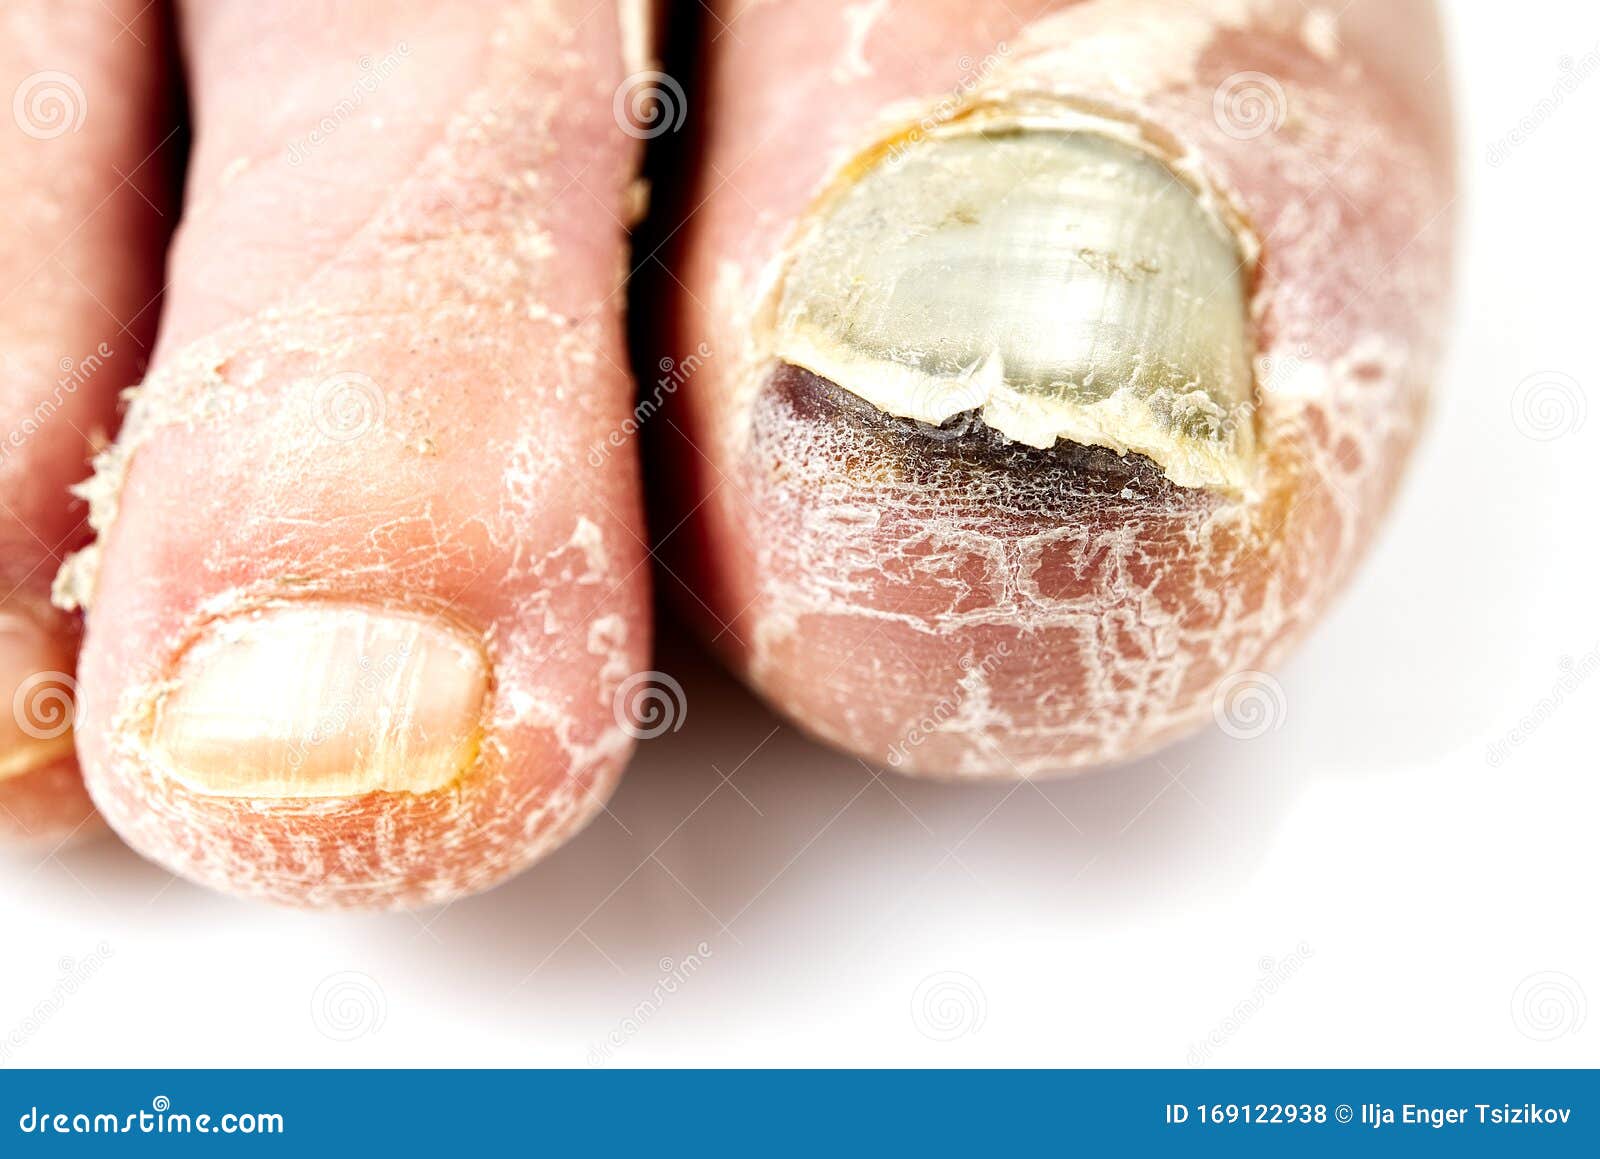 Laser Treatment for Fungal Toenails- Lunula- no side effects | A&A  Podiatrists & Chiropodists